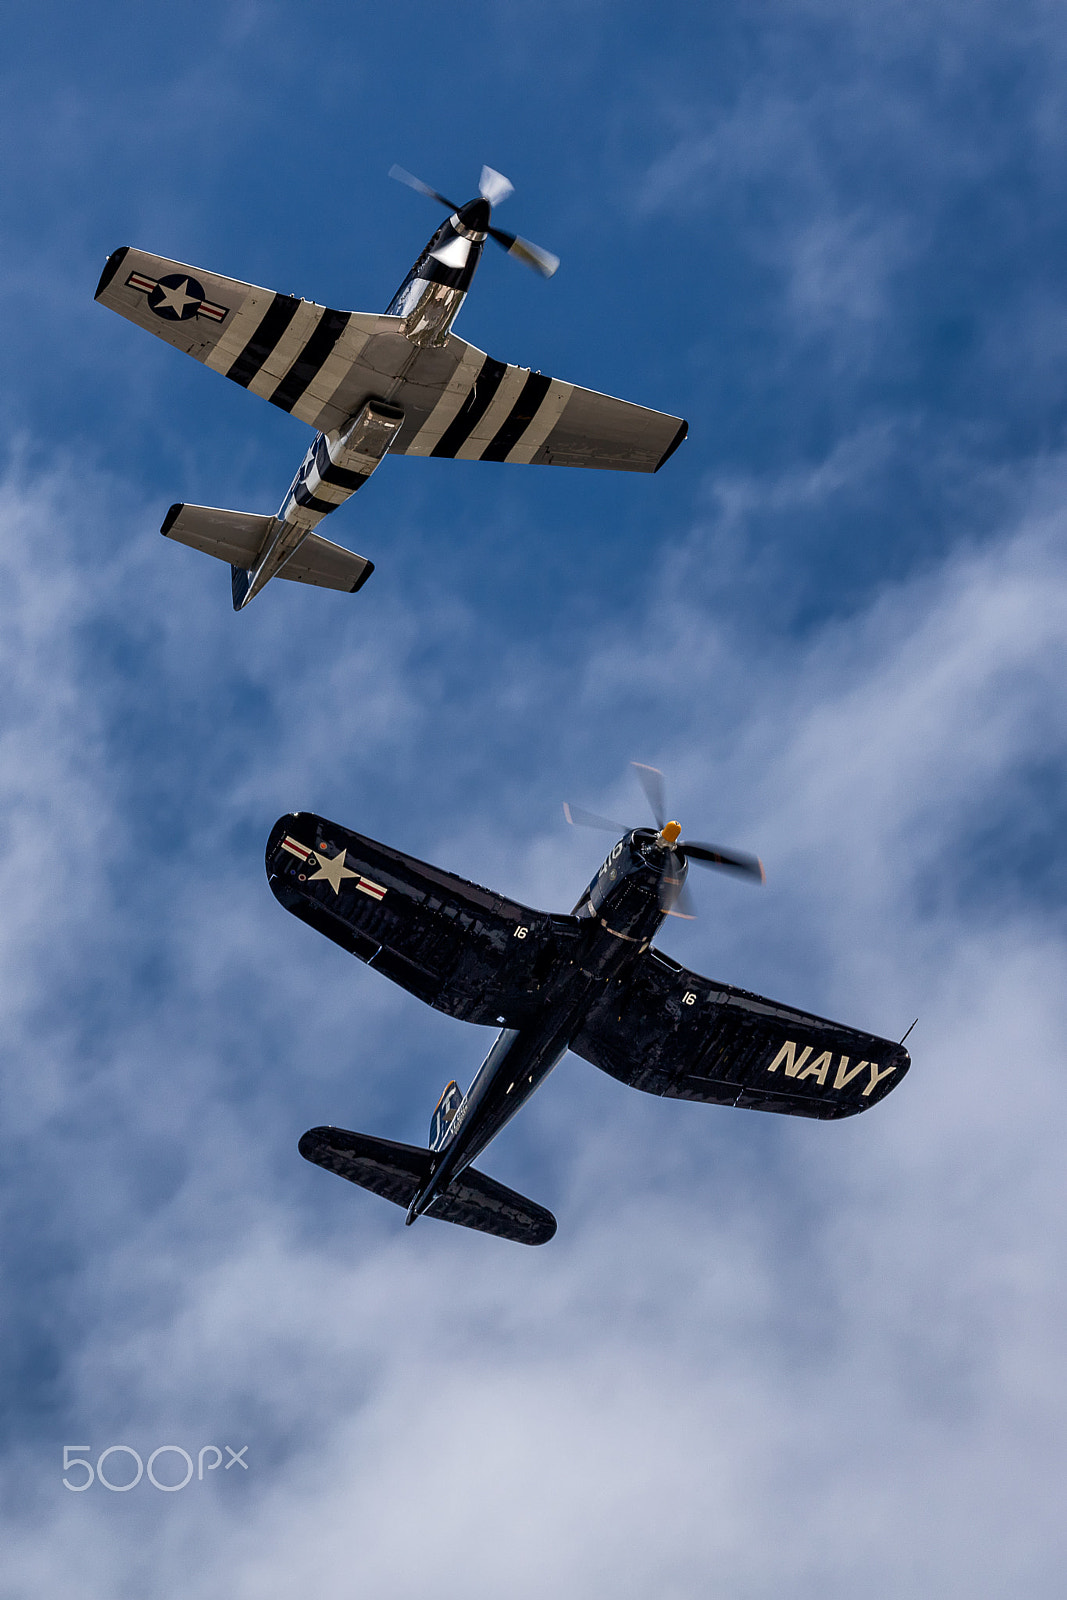 Canon EOS 5DS sample photo. F-4u corsair and p-51 mustang in flight 7 photography